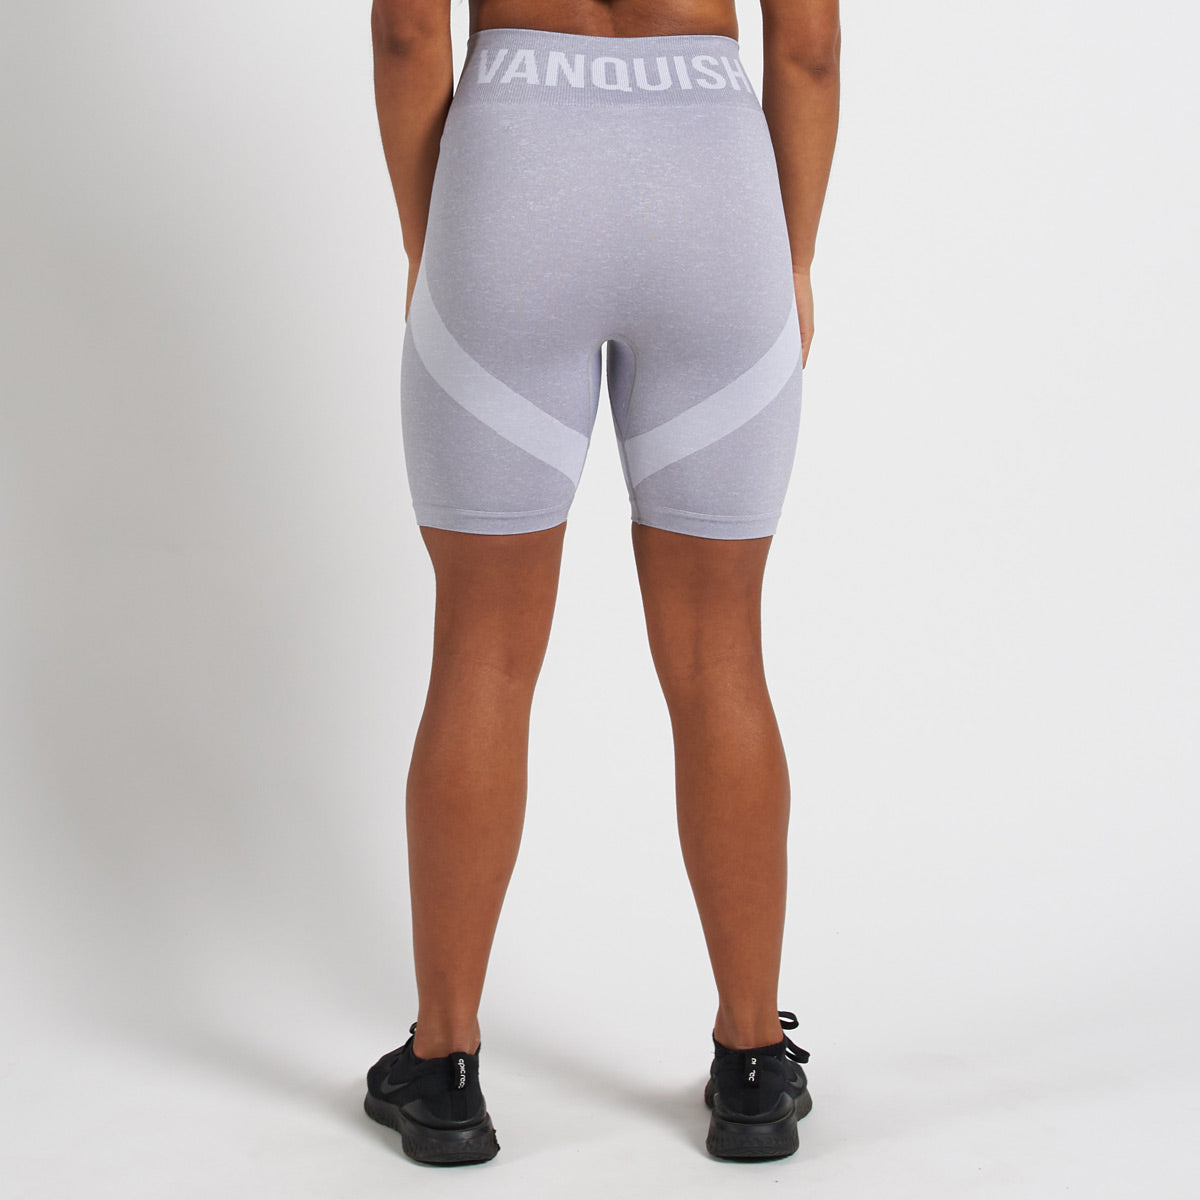 womens white bicycle shorts